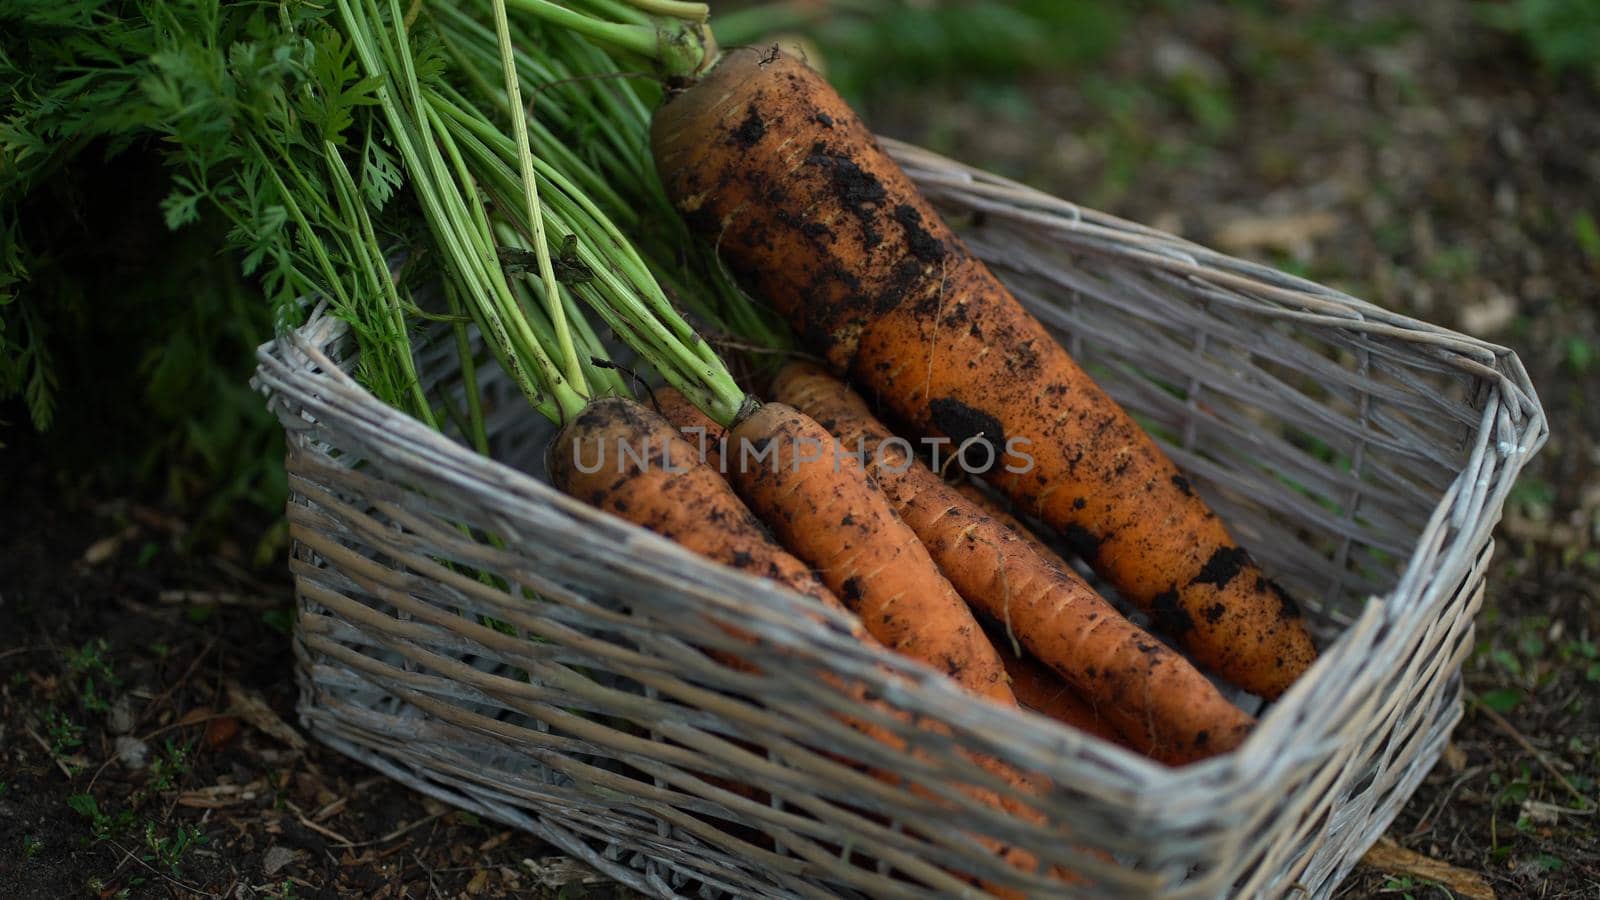 The farmer puts carrots in a straw basket that stands on the ground.